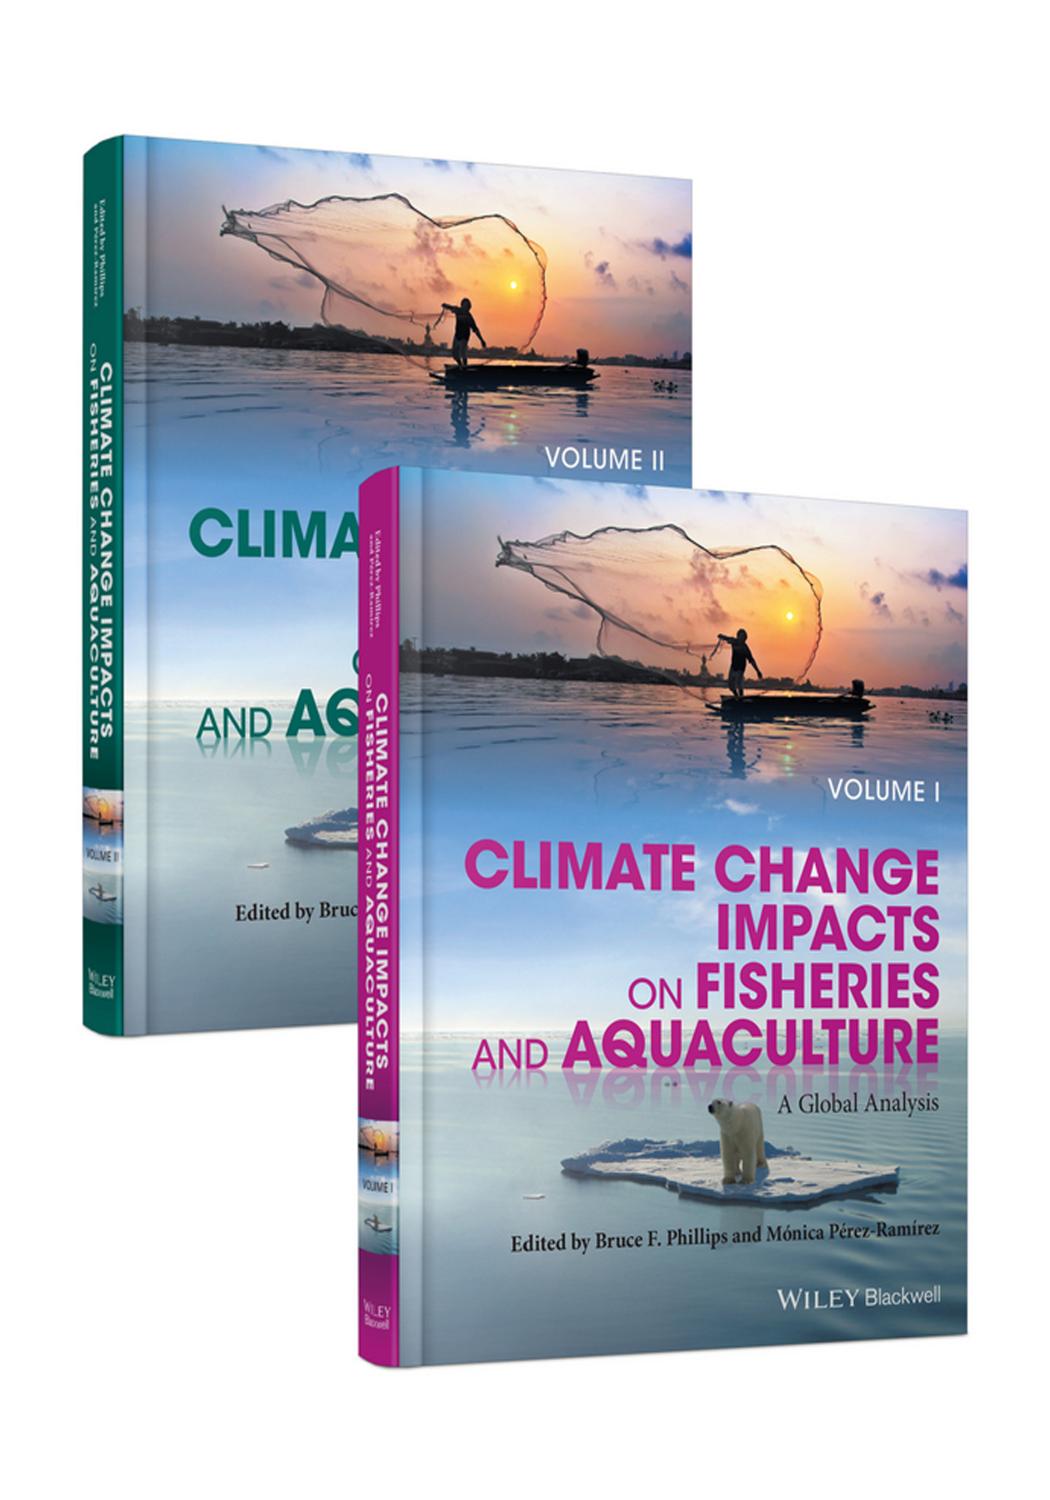 Climate Change Impacts and Aquaculture: A Global Analysis